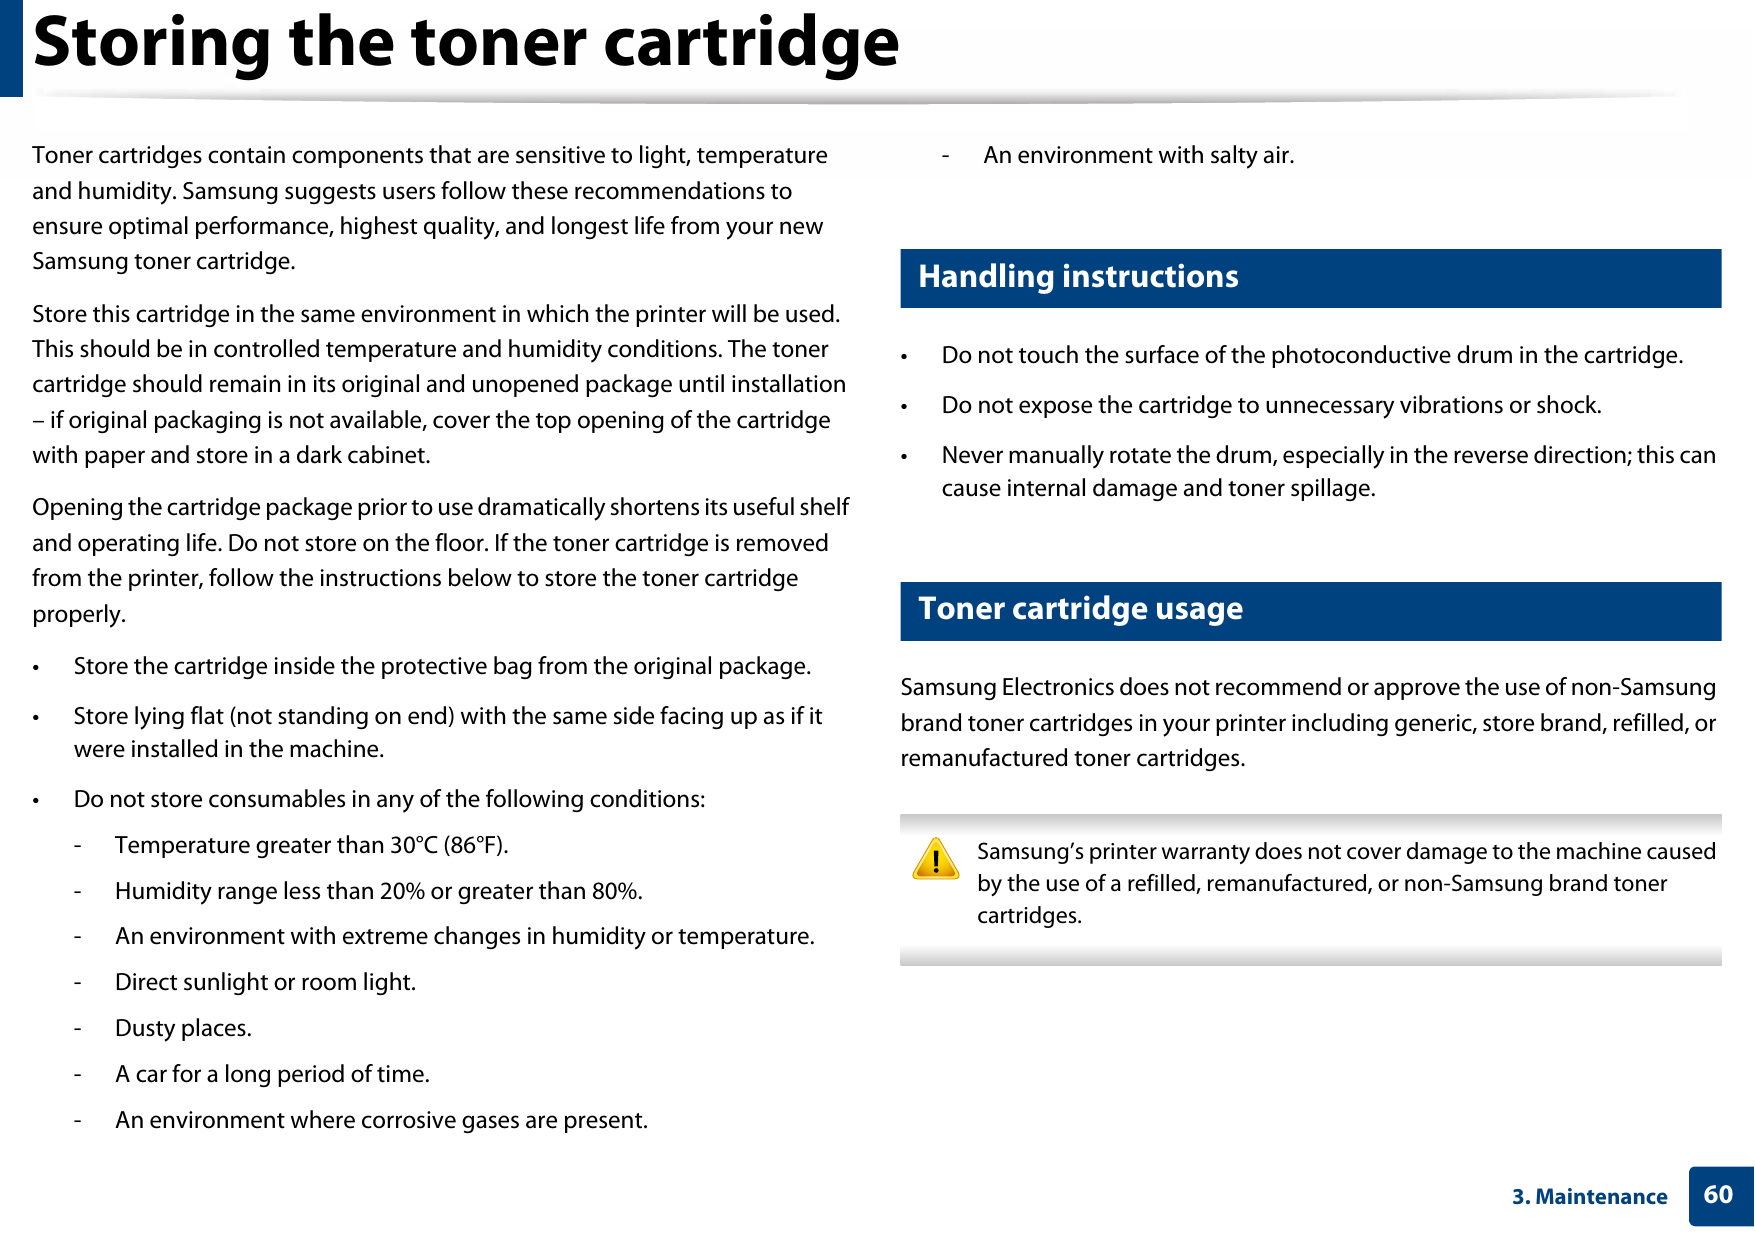 603. MaintenanceStoring the toner cartridgeToner cartridges contain components that are sensitive to light, temperature and humidity. Samsung suggests users follow these recommendations to ensure optimal performance, highest quality, and longest life from your new Samsung toner cartridge.Store this cartridge in the same environment in which the printer will be used. This should be in controlled temperature and humidity conditions. The toner cartridge should remain in its original and unopened package until installation – if original packaging is not available, cover the top opening of the cartridge with paper and store in a dark cabinet.Opening the cartridge package prior to use dramatically shortens its useful shelf and operating life. Do not store on the floor. If the toner cartridge is removed from the printer, follow the instructions below to store the toner cartridge properly.• Store the cartridge inside the protective bag from the original package. • Store lying flat (not standing on end) with the same side facing up as if it were installed in the machine.• Do not store consumables in any of the following conditions:- Temperature greater than 30°C (86°F).- Humidity range less than 20% or greater than 80%.- An environment with extreme changes in humidity or temperature.- Direct sunlight or room light.- Dusty places.- A car for a long period of time.- An environment where corrosive gases are present.- An environment with salty air.1 Handling instructions• Do not touch the surface of the photoconductive drum in the cartridge.• Do not expose the cartridge to unnecessary vibrations or shock.• Never manually rotate the drum, especially in the reverse direction; this can cause internal damage and toner spillage.2 Toner cartridge usageSamsung Electronics does not recommend or approve the use of non-Samsung brand toner cartridges in your printer including generic, store brand, refilled, or remanufactured toner cartridges. Samsung’s printer warranty does not cover damage to the machine caused by the use of a refilled, remanufactured, or non-Samsung brand toner cartridges. 